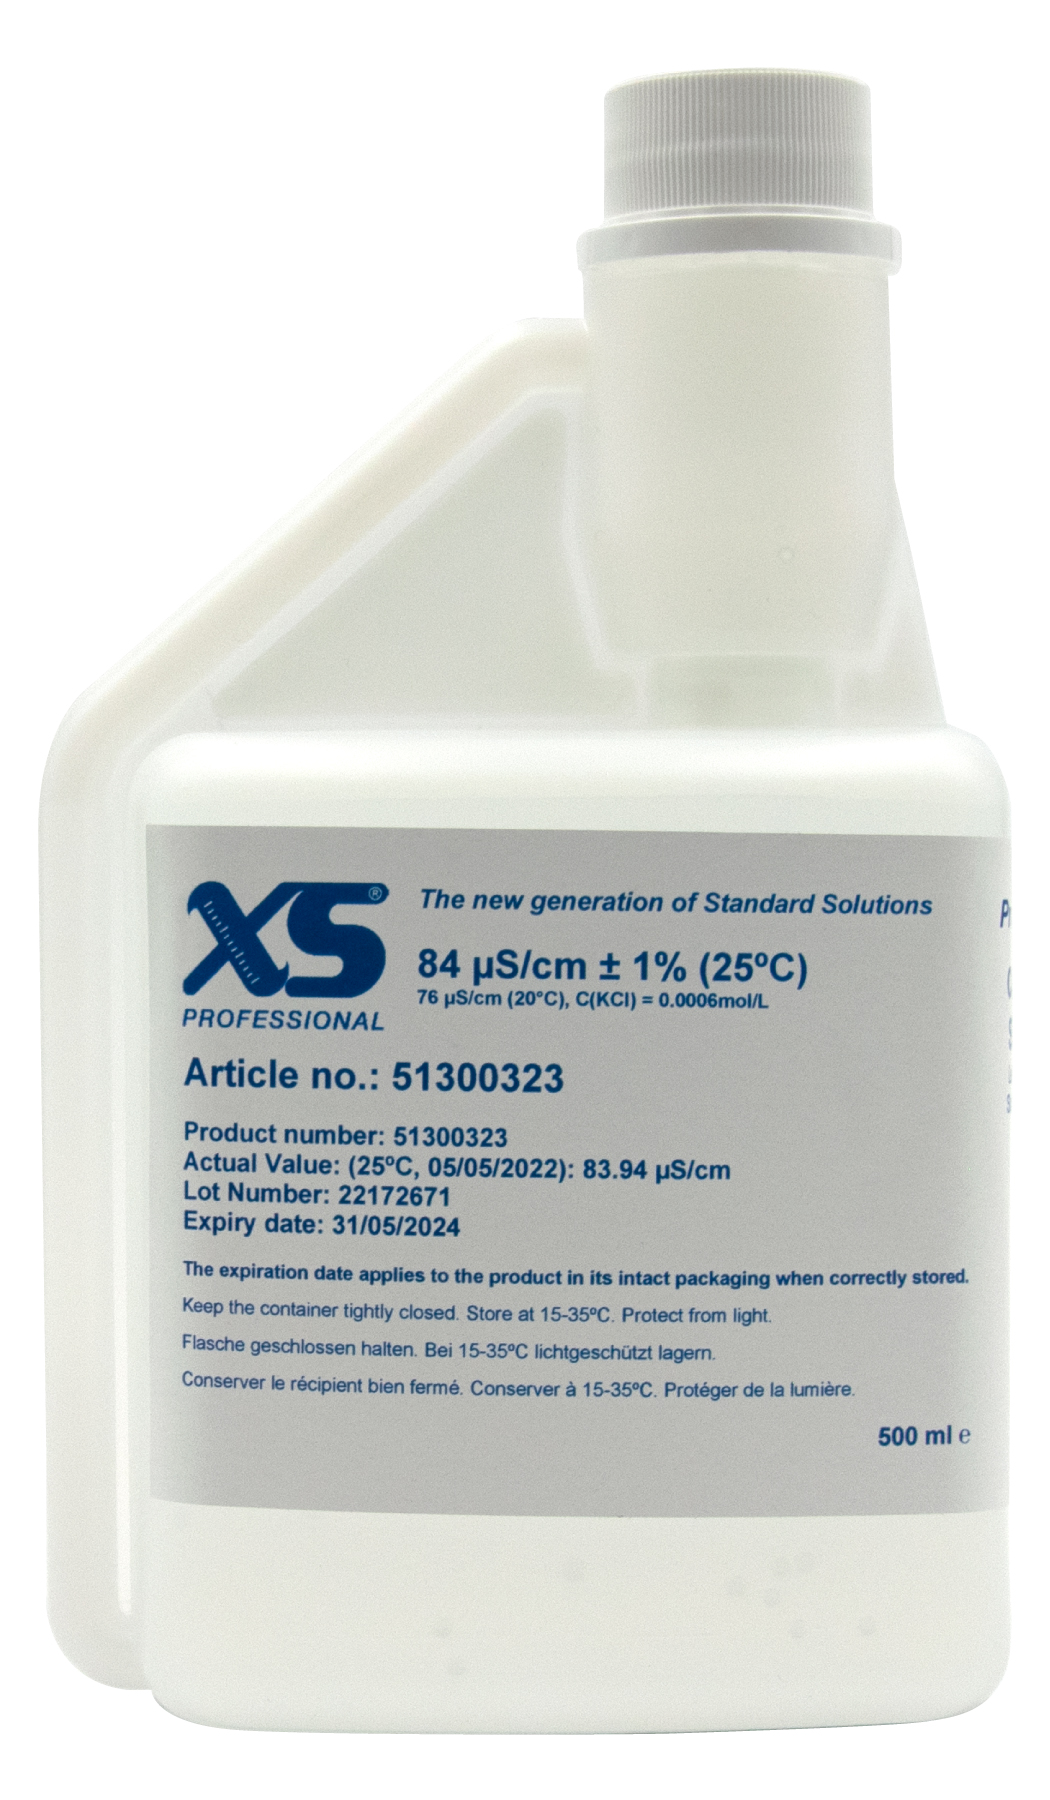 XS Professional 84µS/cm - 500ml conductivity calibration solution with DFM certificate